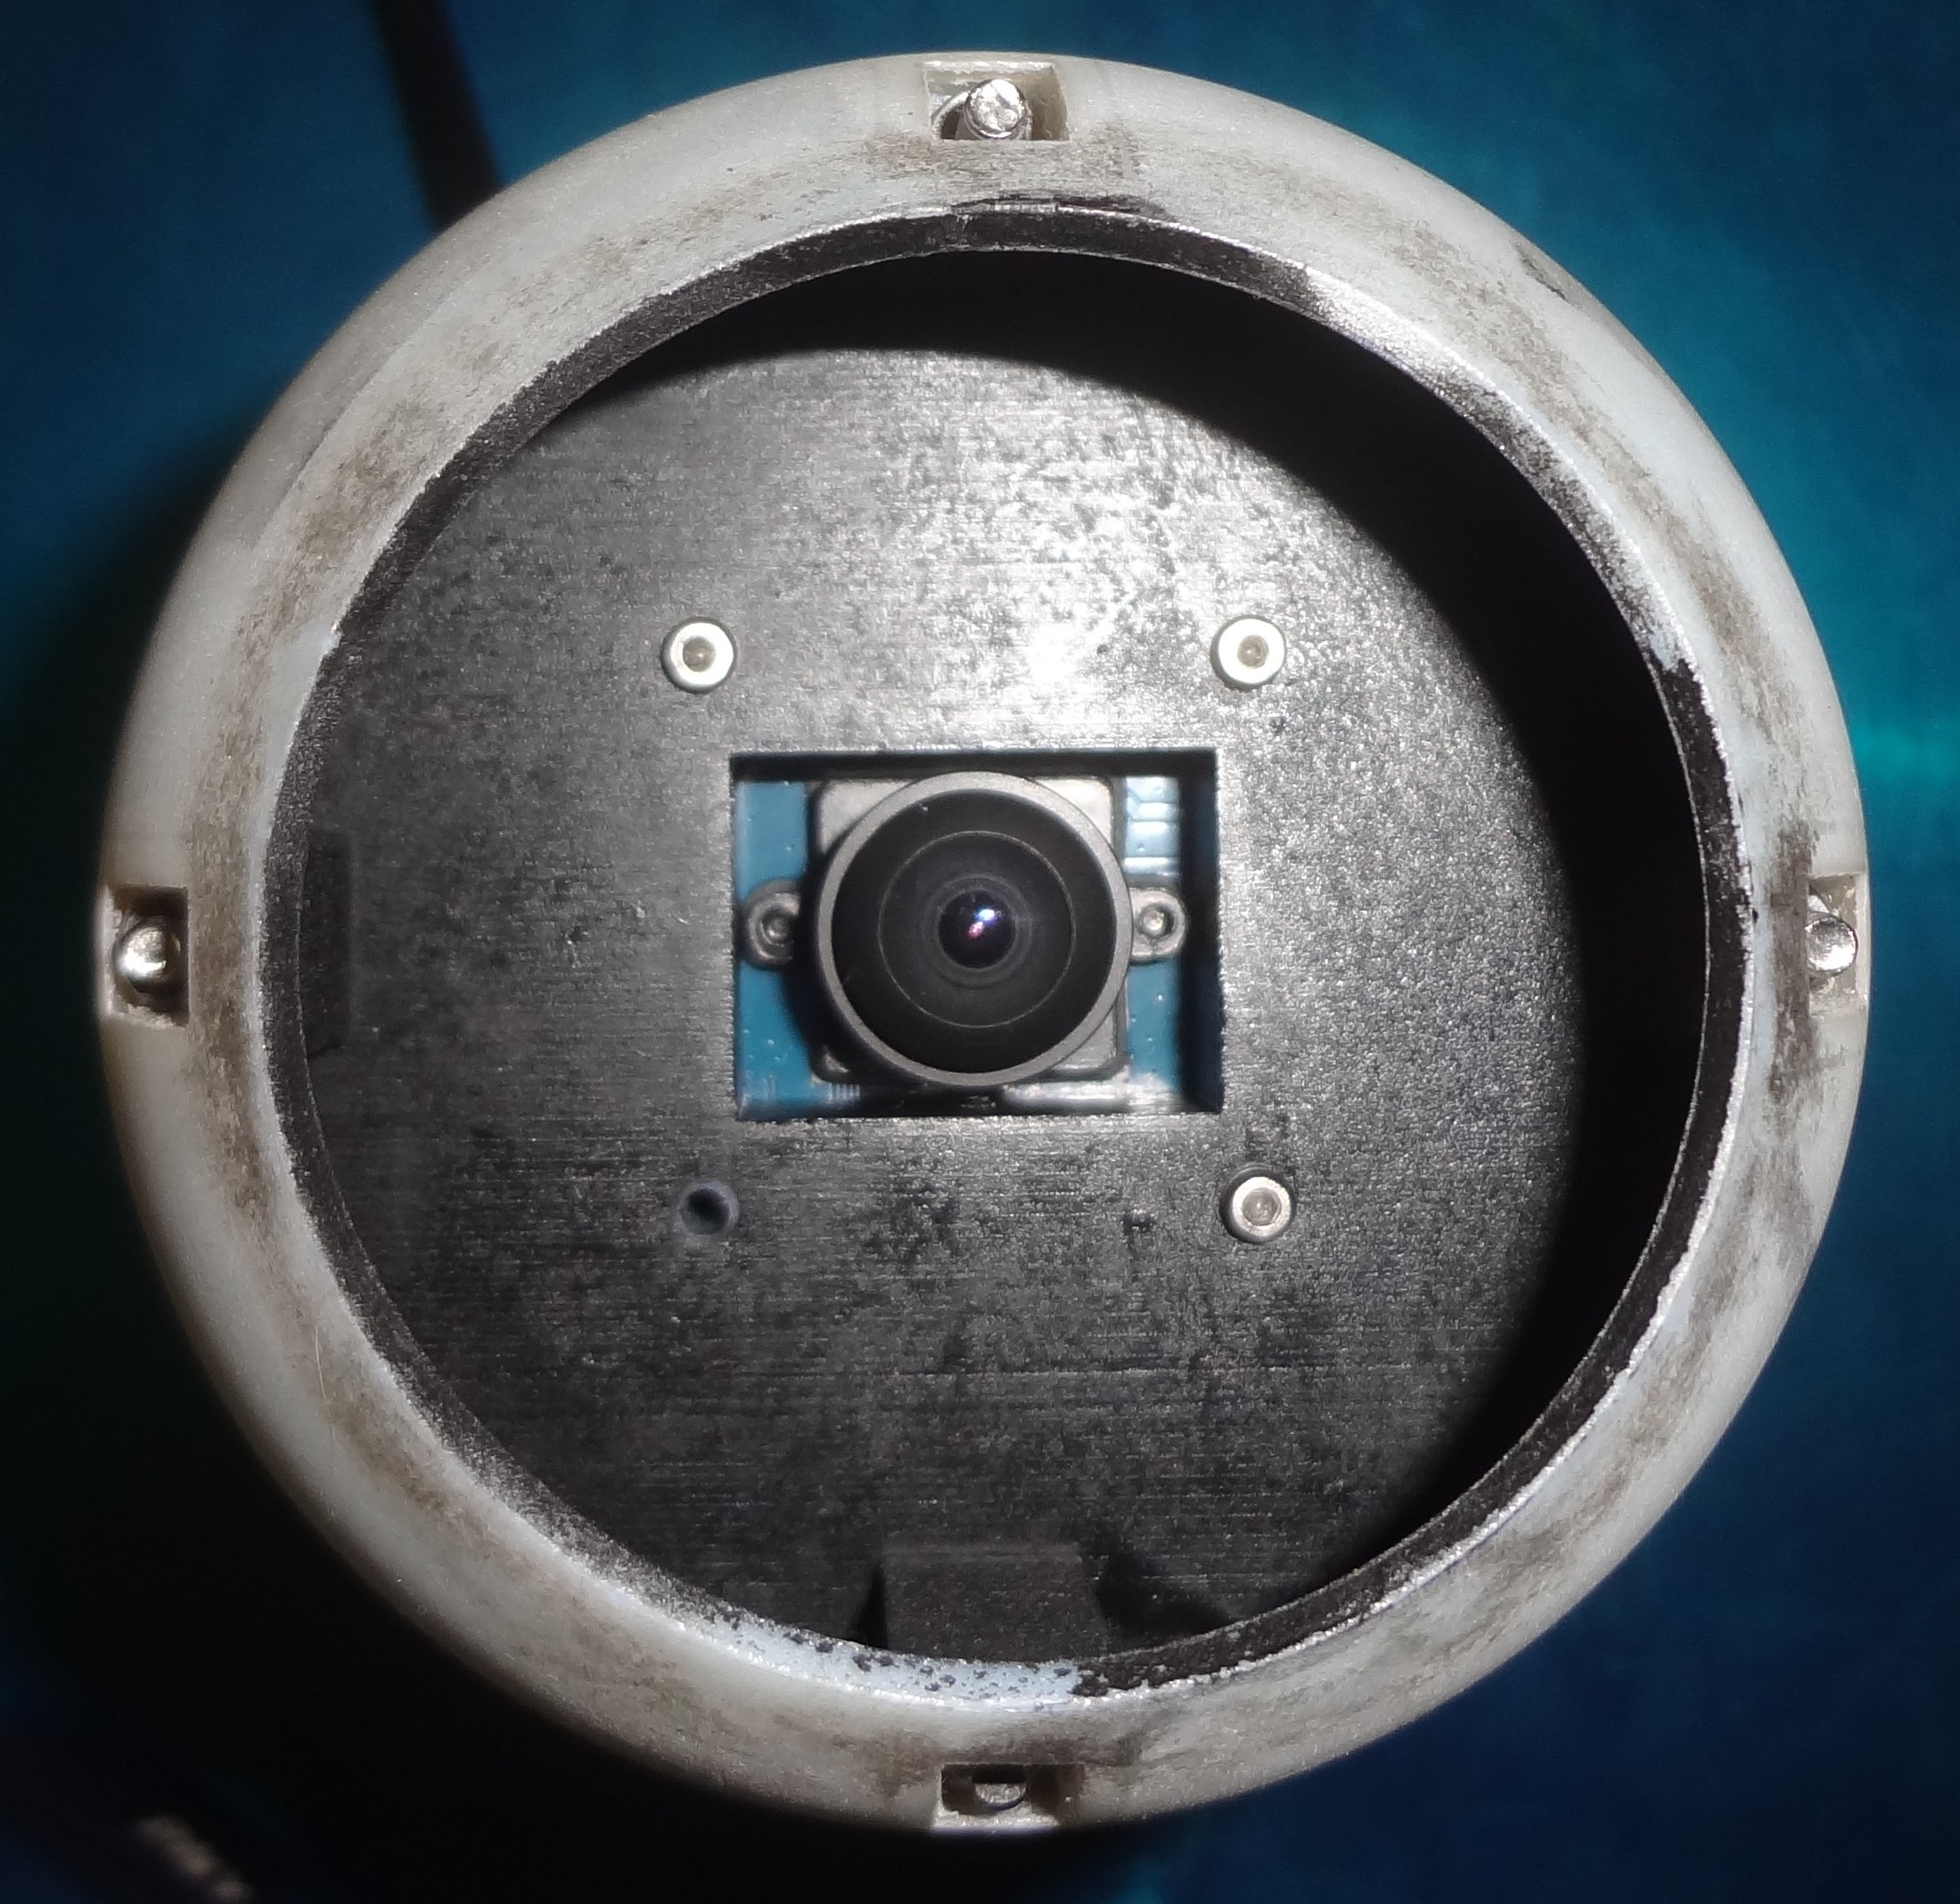 Camera embedded in ball joint